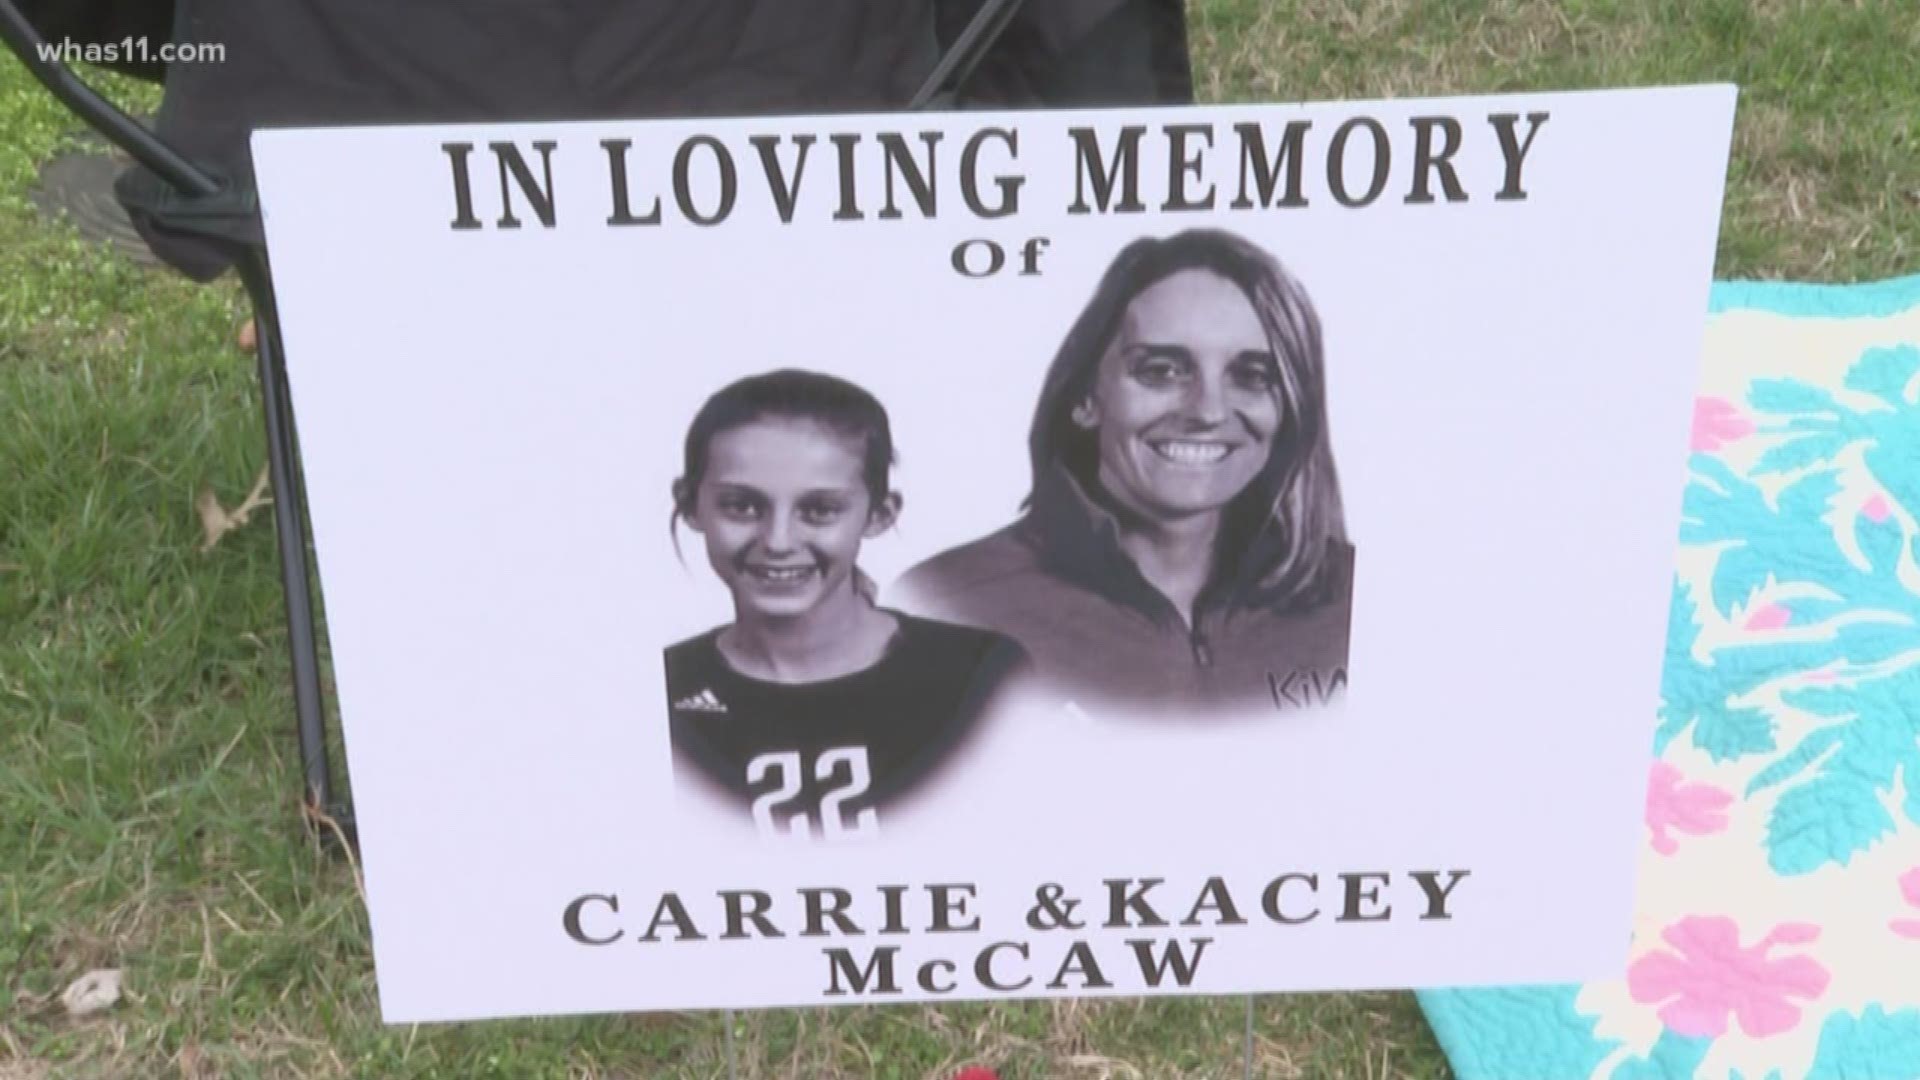 Hundreds packed St. Raphael the Archangel Catholic Church to say their final goodbyes to Carrie and Kacey McCaw, the mother and daughter laid to rest together.